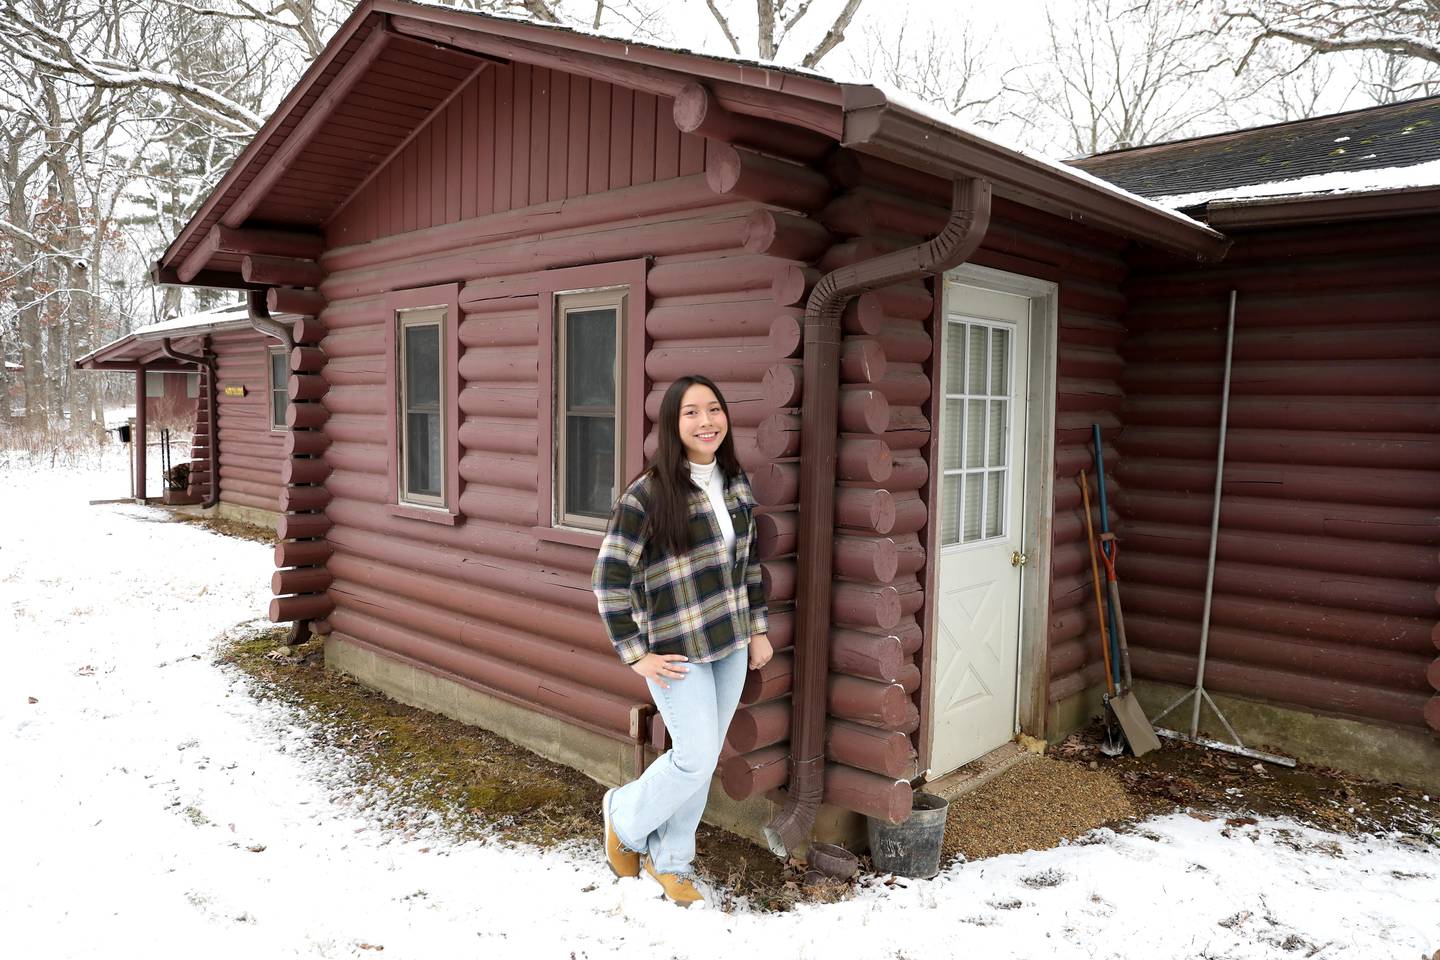 Kaneland High School junior Kaitlin Liu of Sugar Grove is creating Tech Camp GSNI by building a hi-tech MakerSpace at Camp Dean in Big Rock that will feature robotics, 3D printers, embroiders, laser cutters, laptops, coding, Snap Circuits, rocketry and more. Kailtin is an Ambassador Girl Scout with Troop 1177.